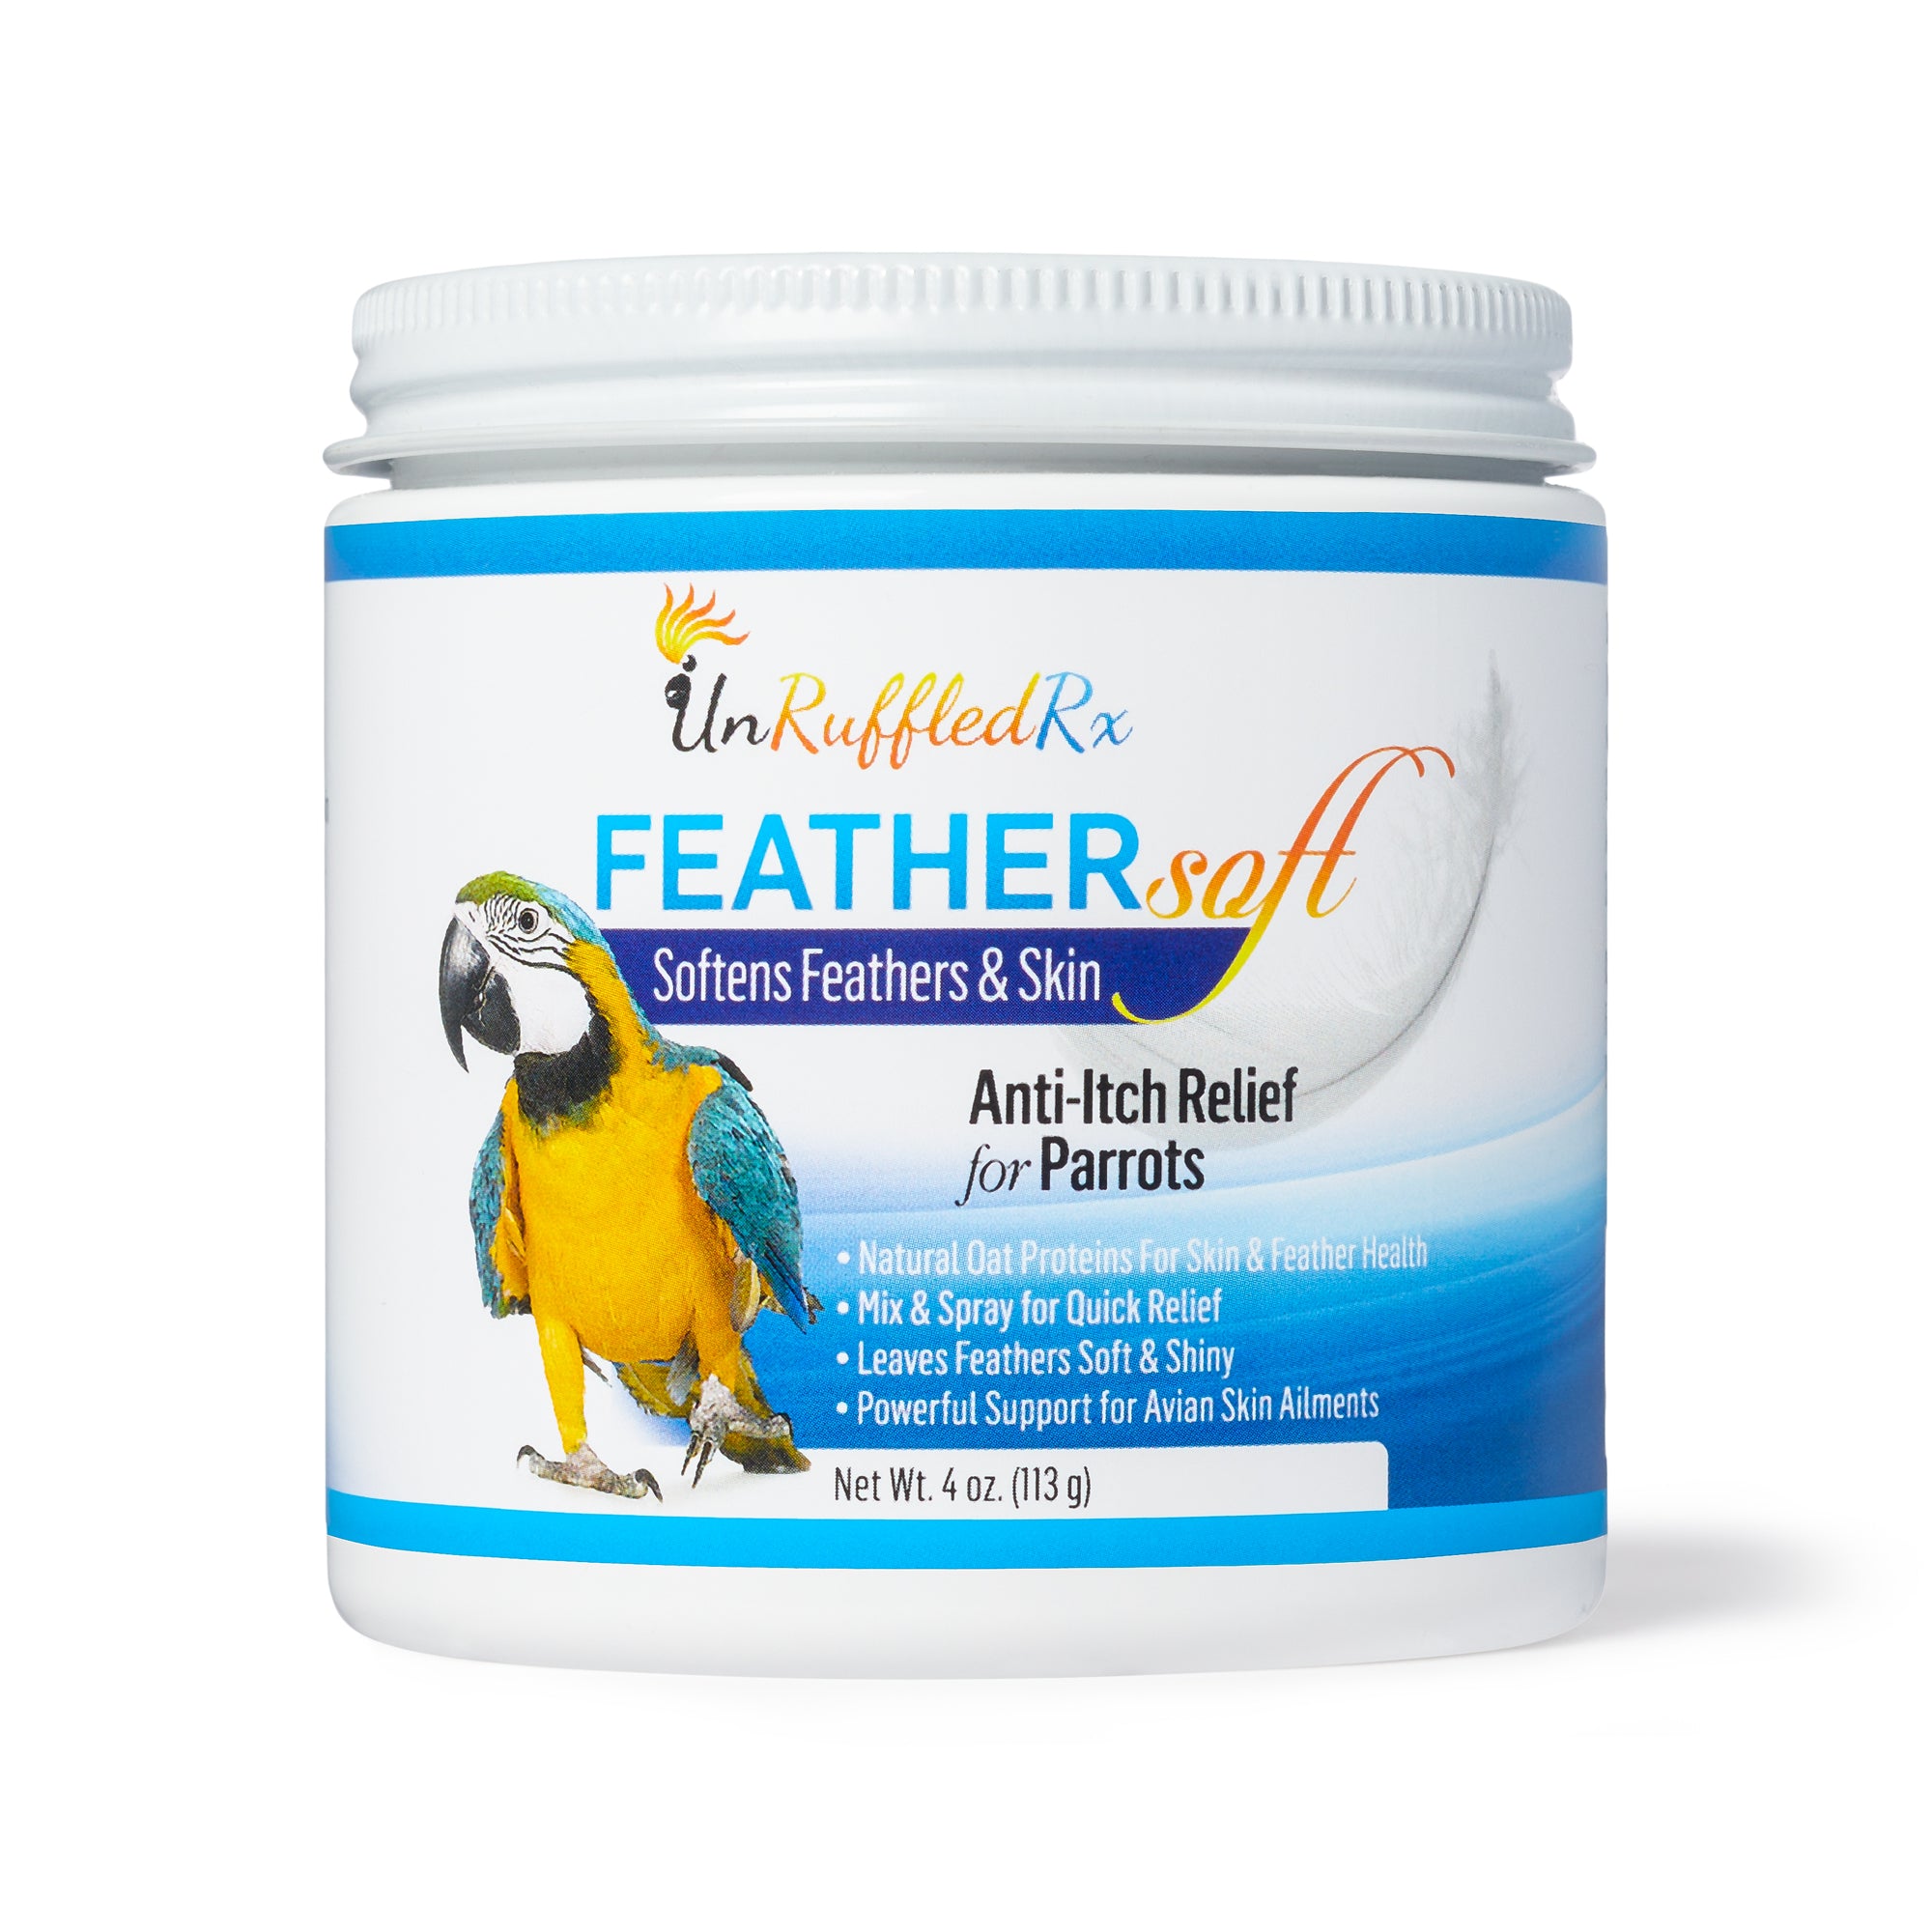 UnRuffledRx FeatherSoft Anti-itch Relief for Birds, 4 oz.